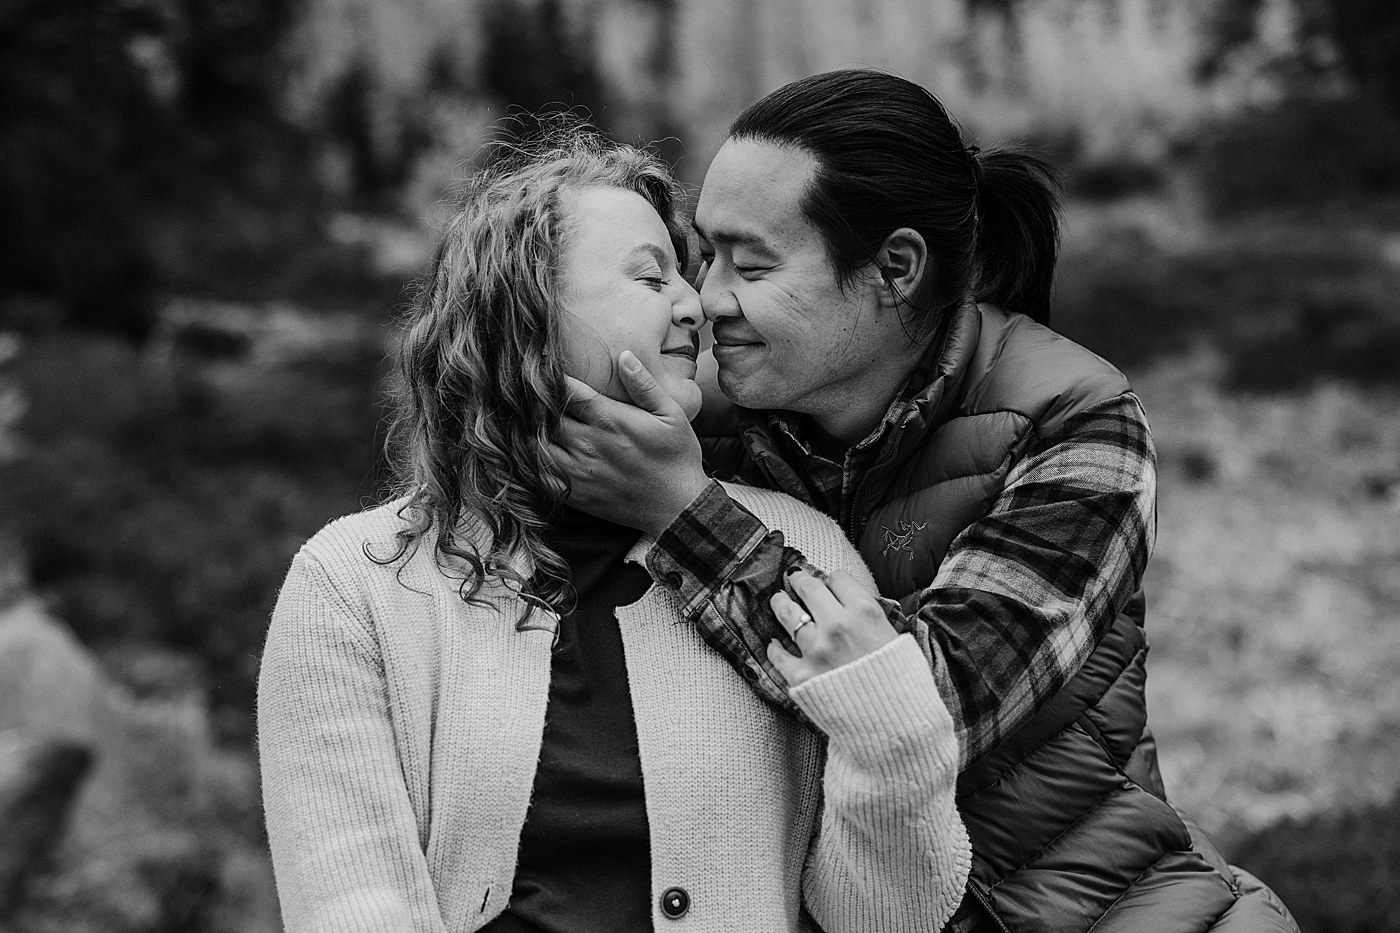 Adventure engagement session in the PNW during fall. Photo by Megan Montalvo Photography.